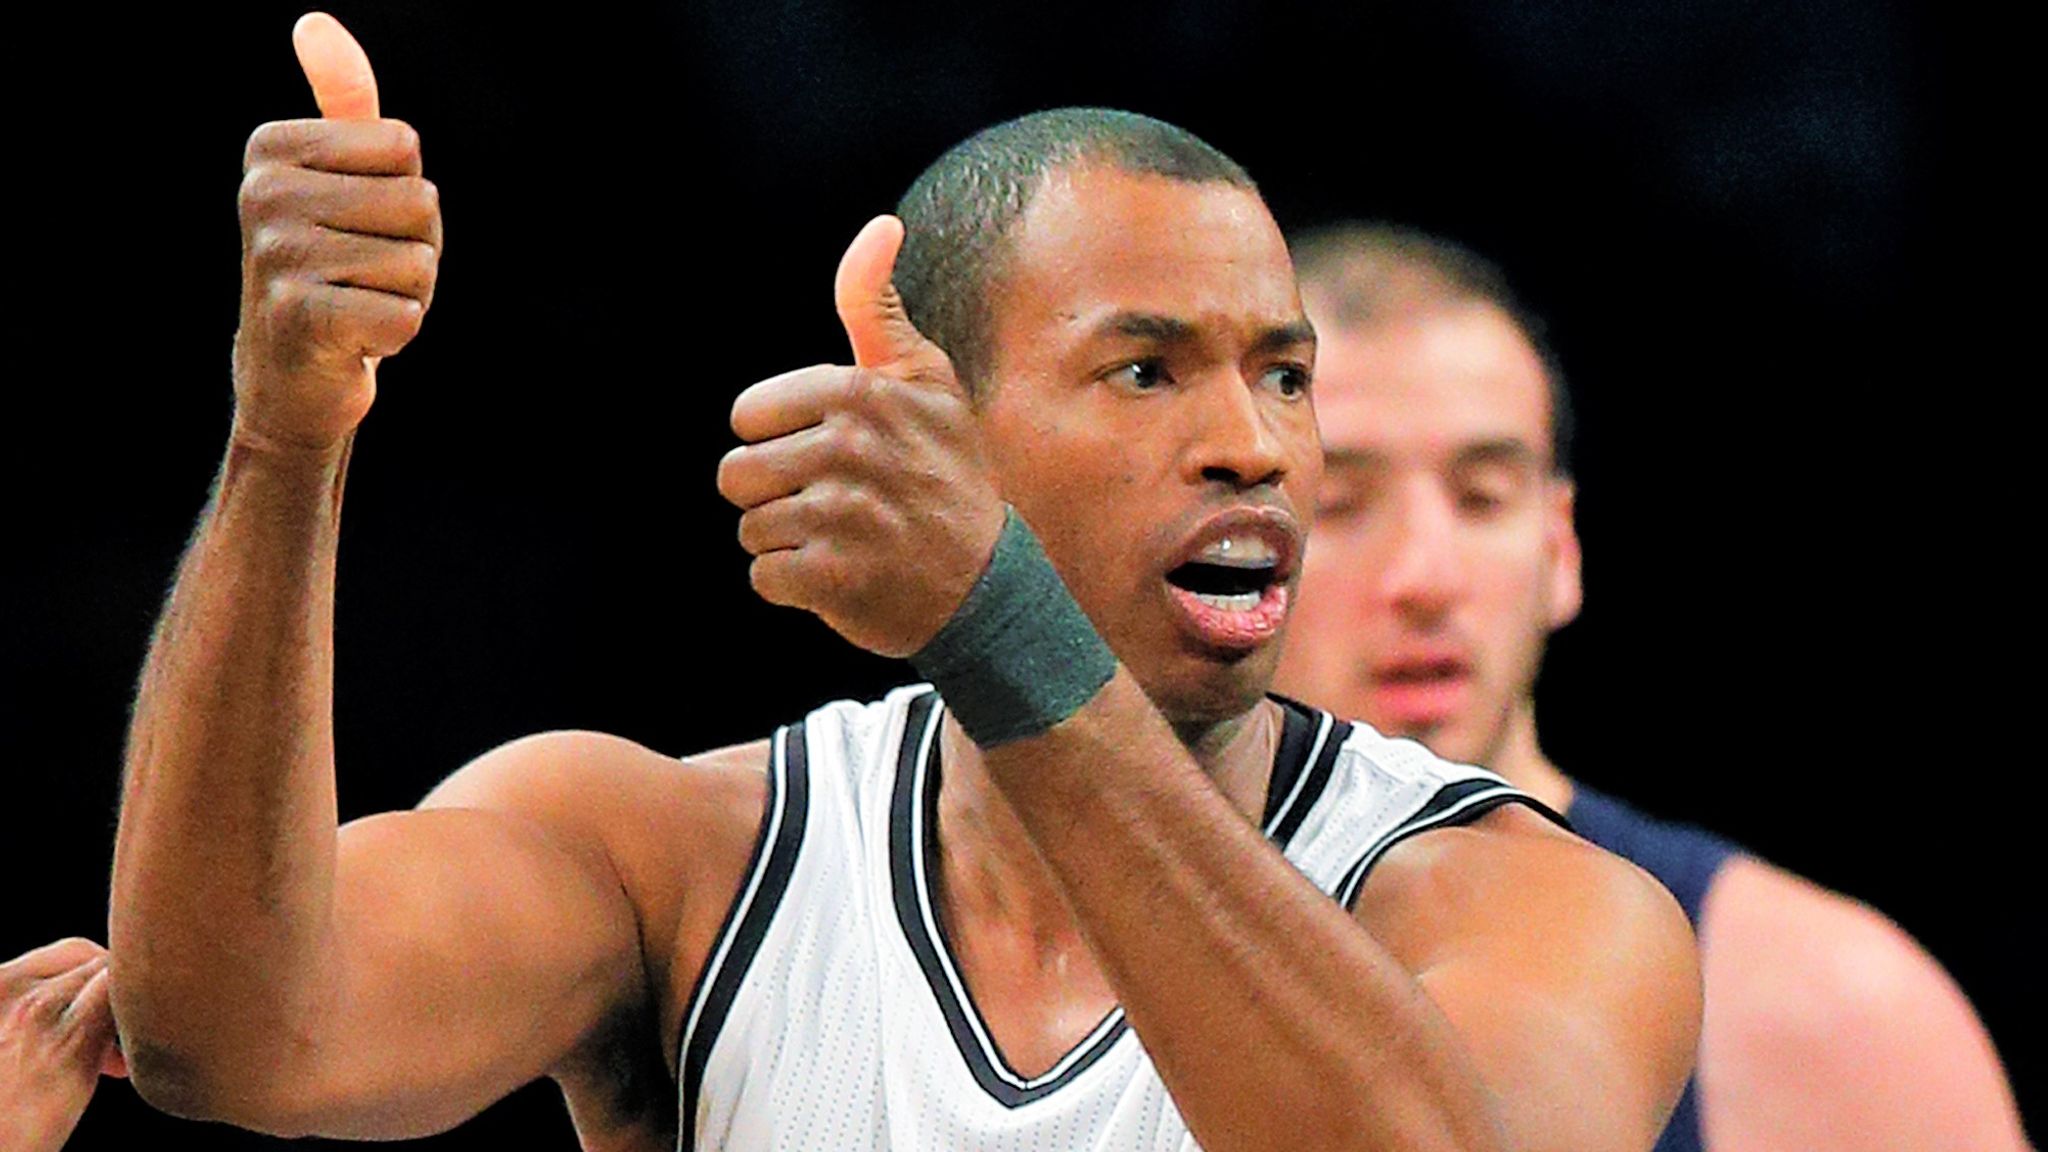 John Amaechi Talked To Jason Collins Before He Came Out, Says He